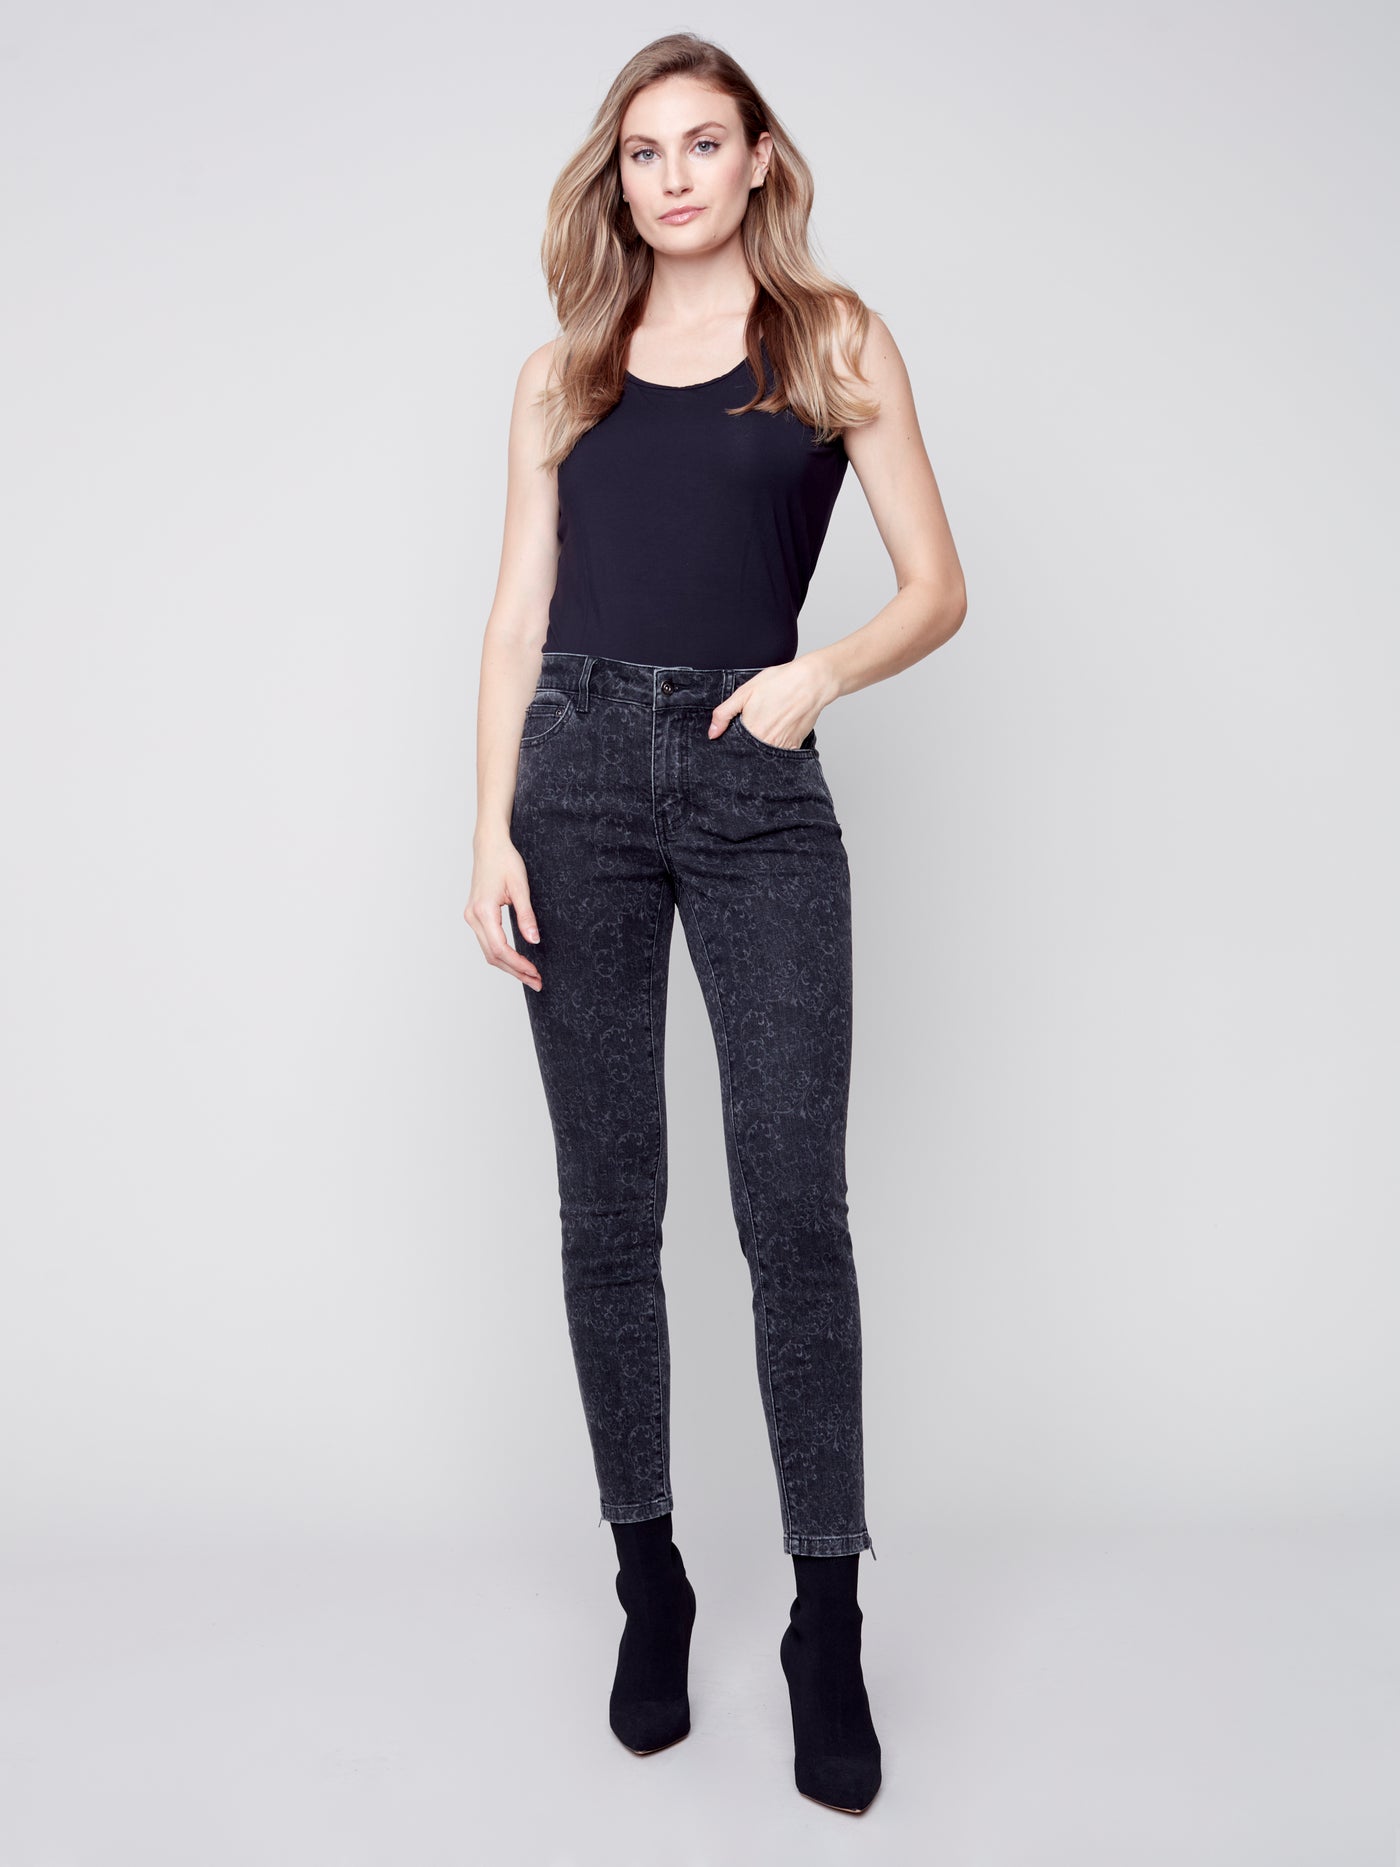 Charcoal Side Zip Detail Pant